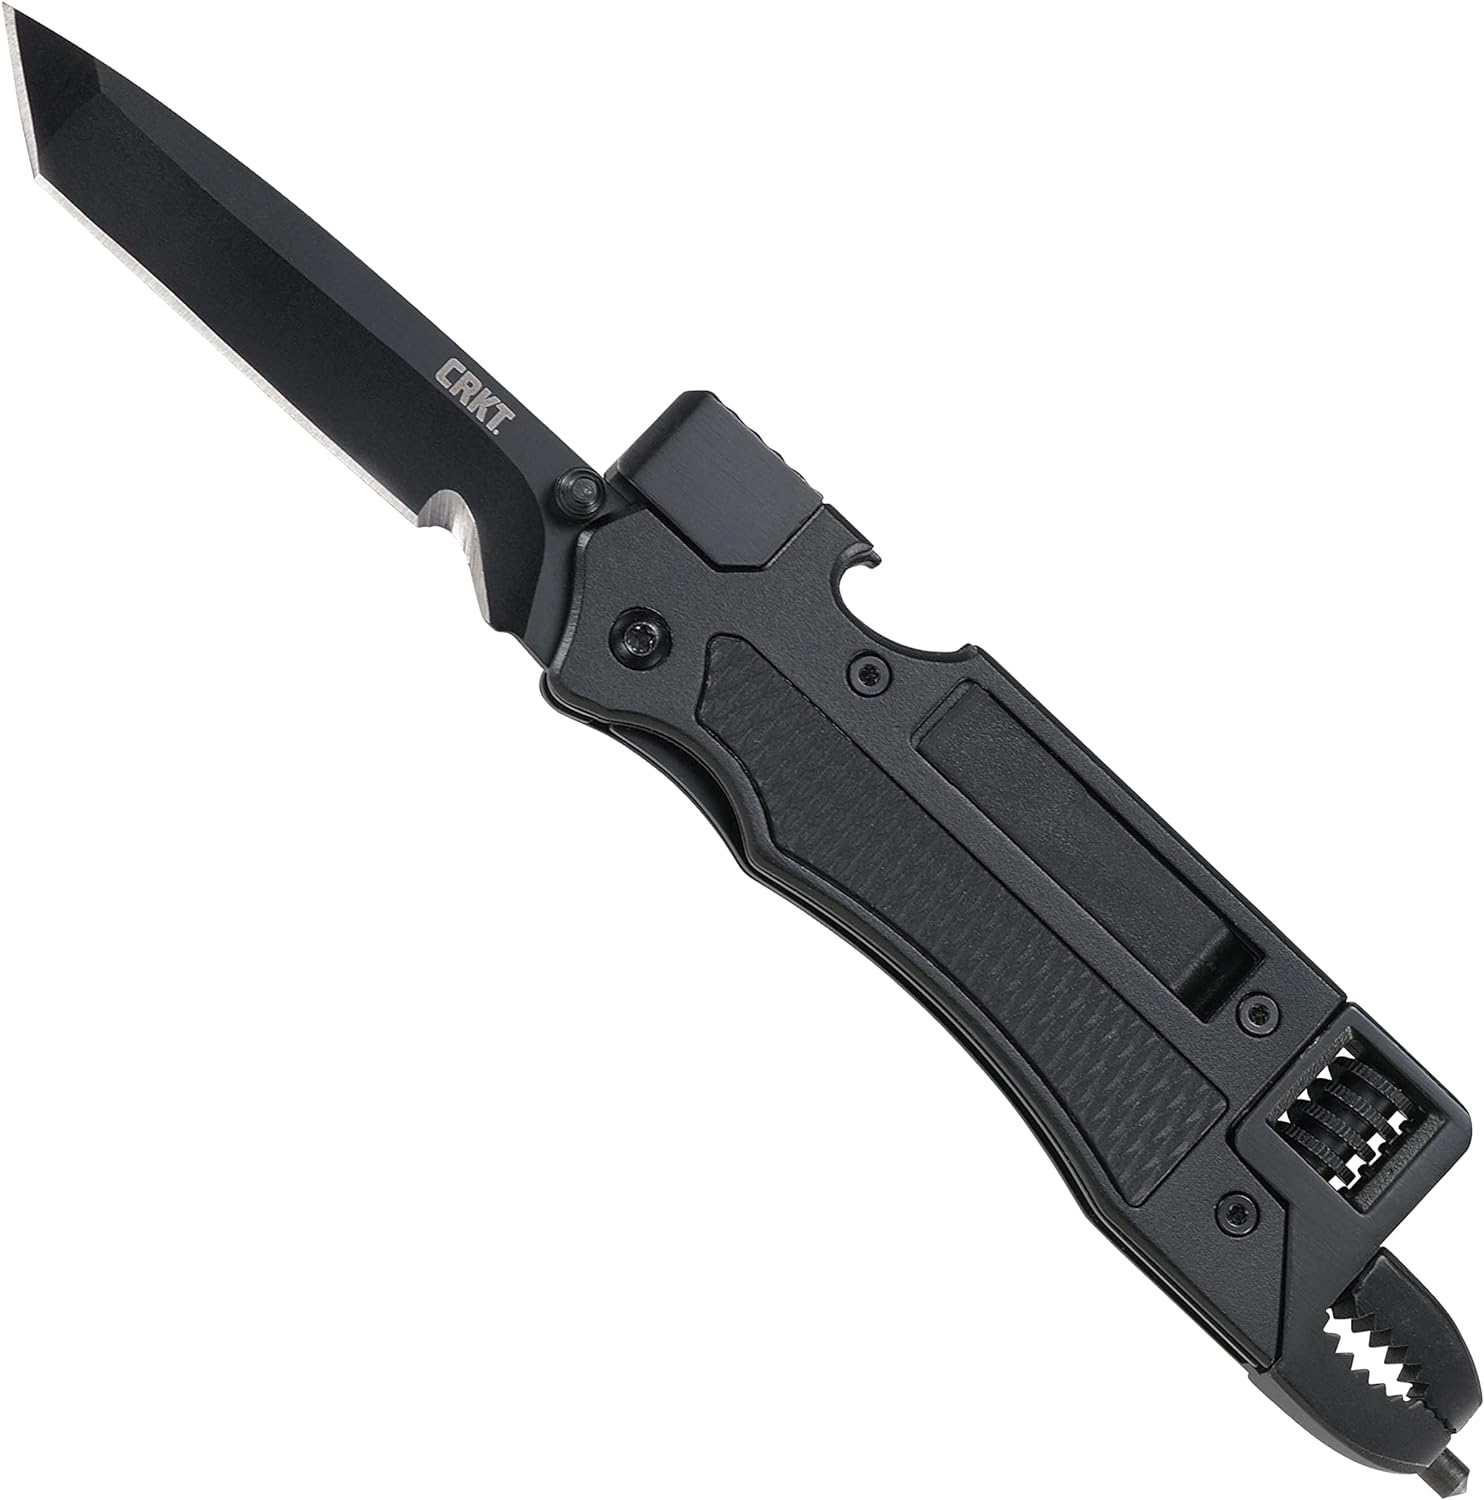 Columbia River Knife & Tool (CRKT) CRKT Septimo Multi-Tool: Everyday Carry, Black Oxide Blade, Liner Lock, Aluminum w/ Glass-Reinforced Nylon Inlay, One Position